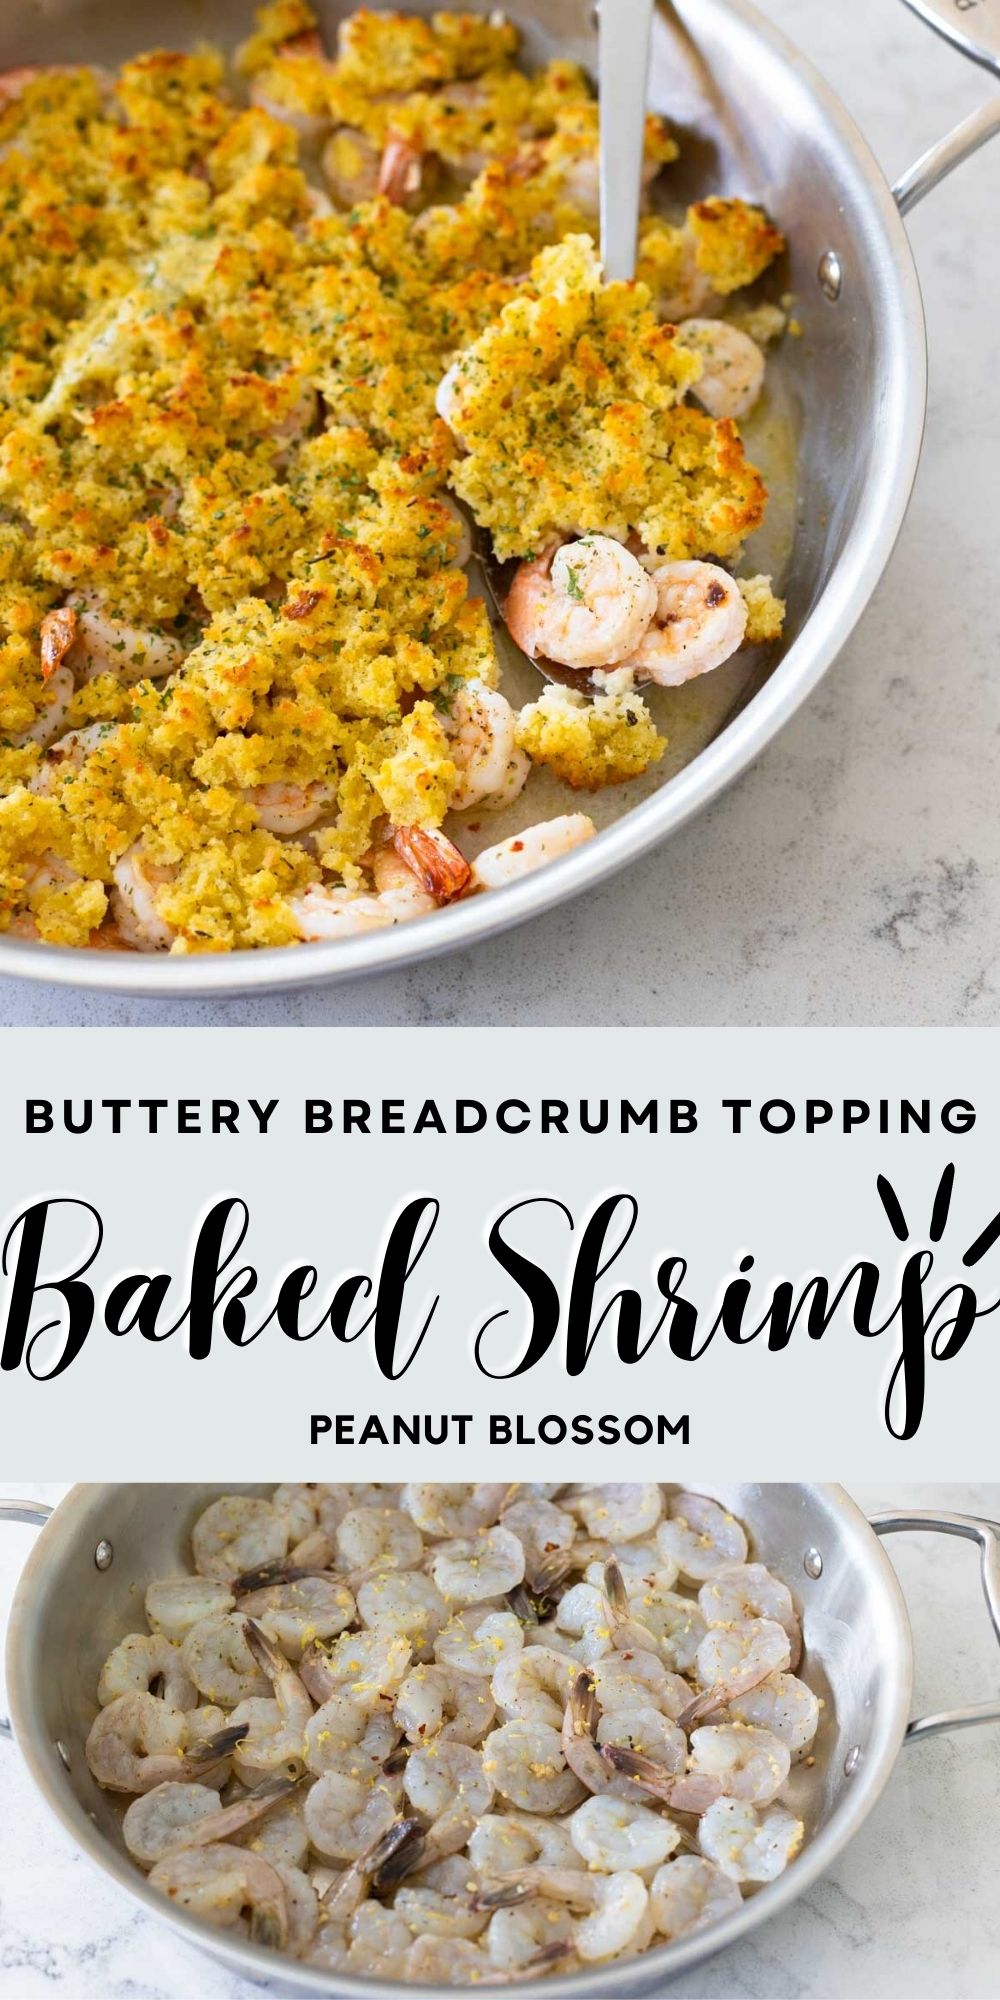 A photo collage shows the skillet with the baked shrimp with bread crumb topping being served from the pan on top and the skillet with the raw shrimp in a single layer on the bottom.